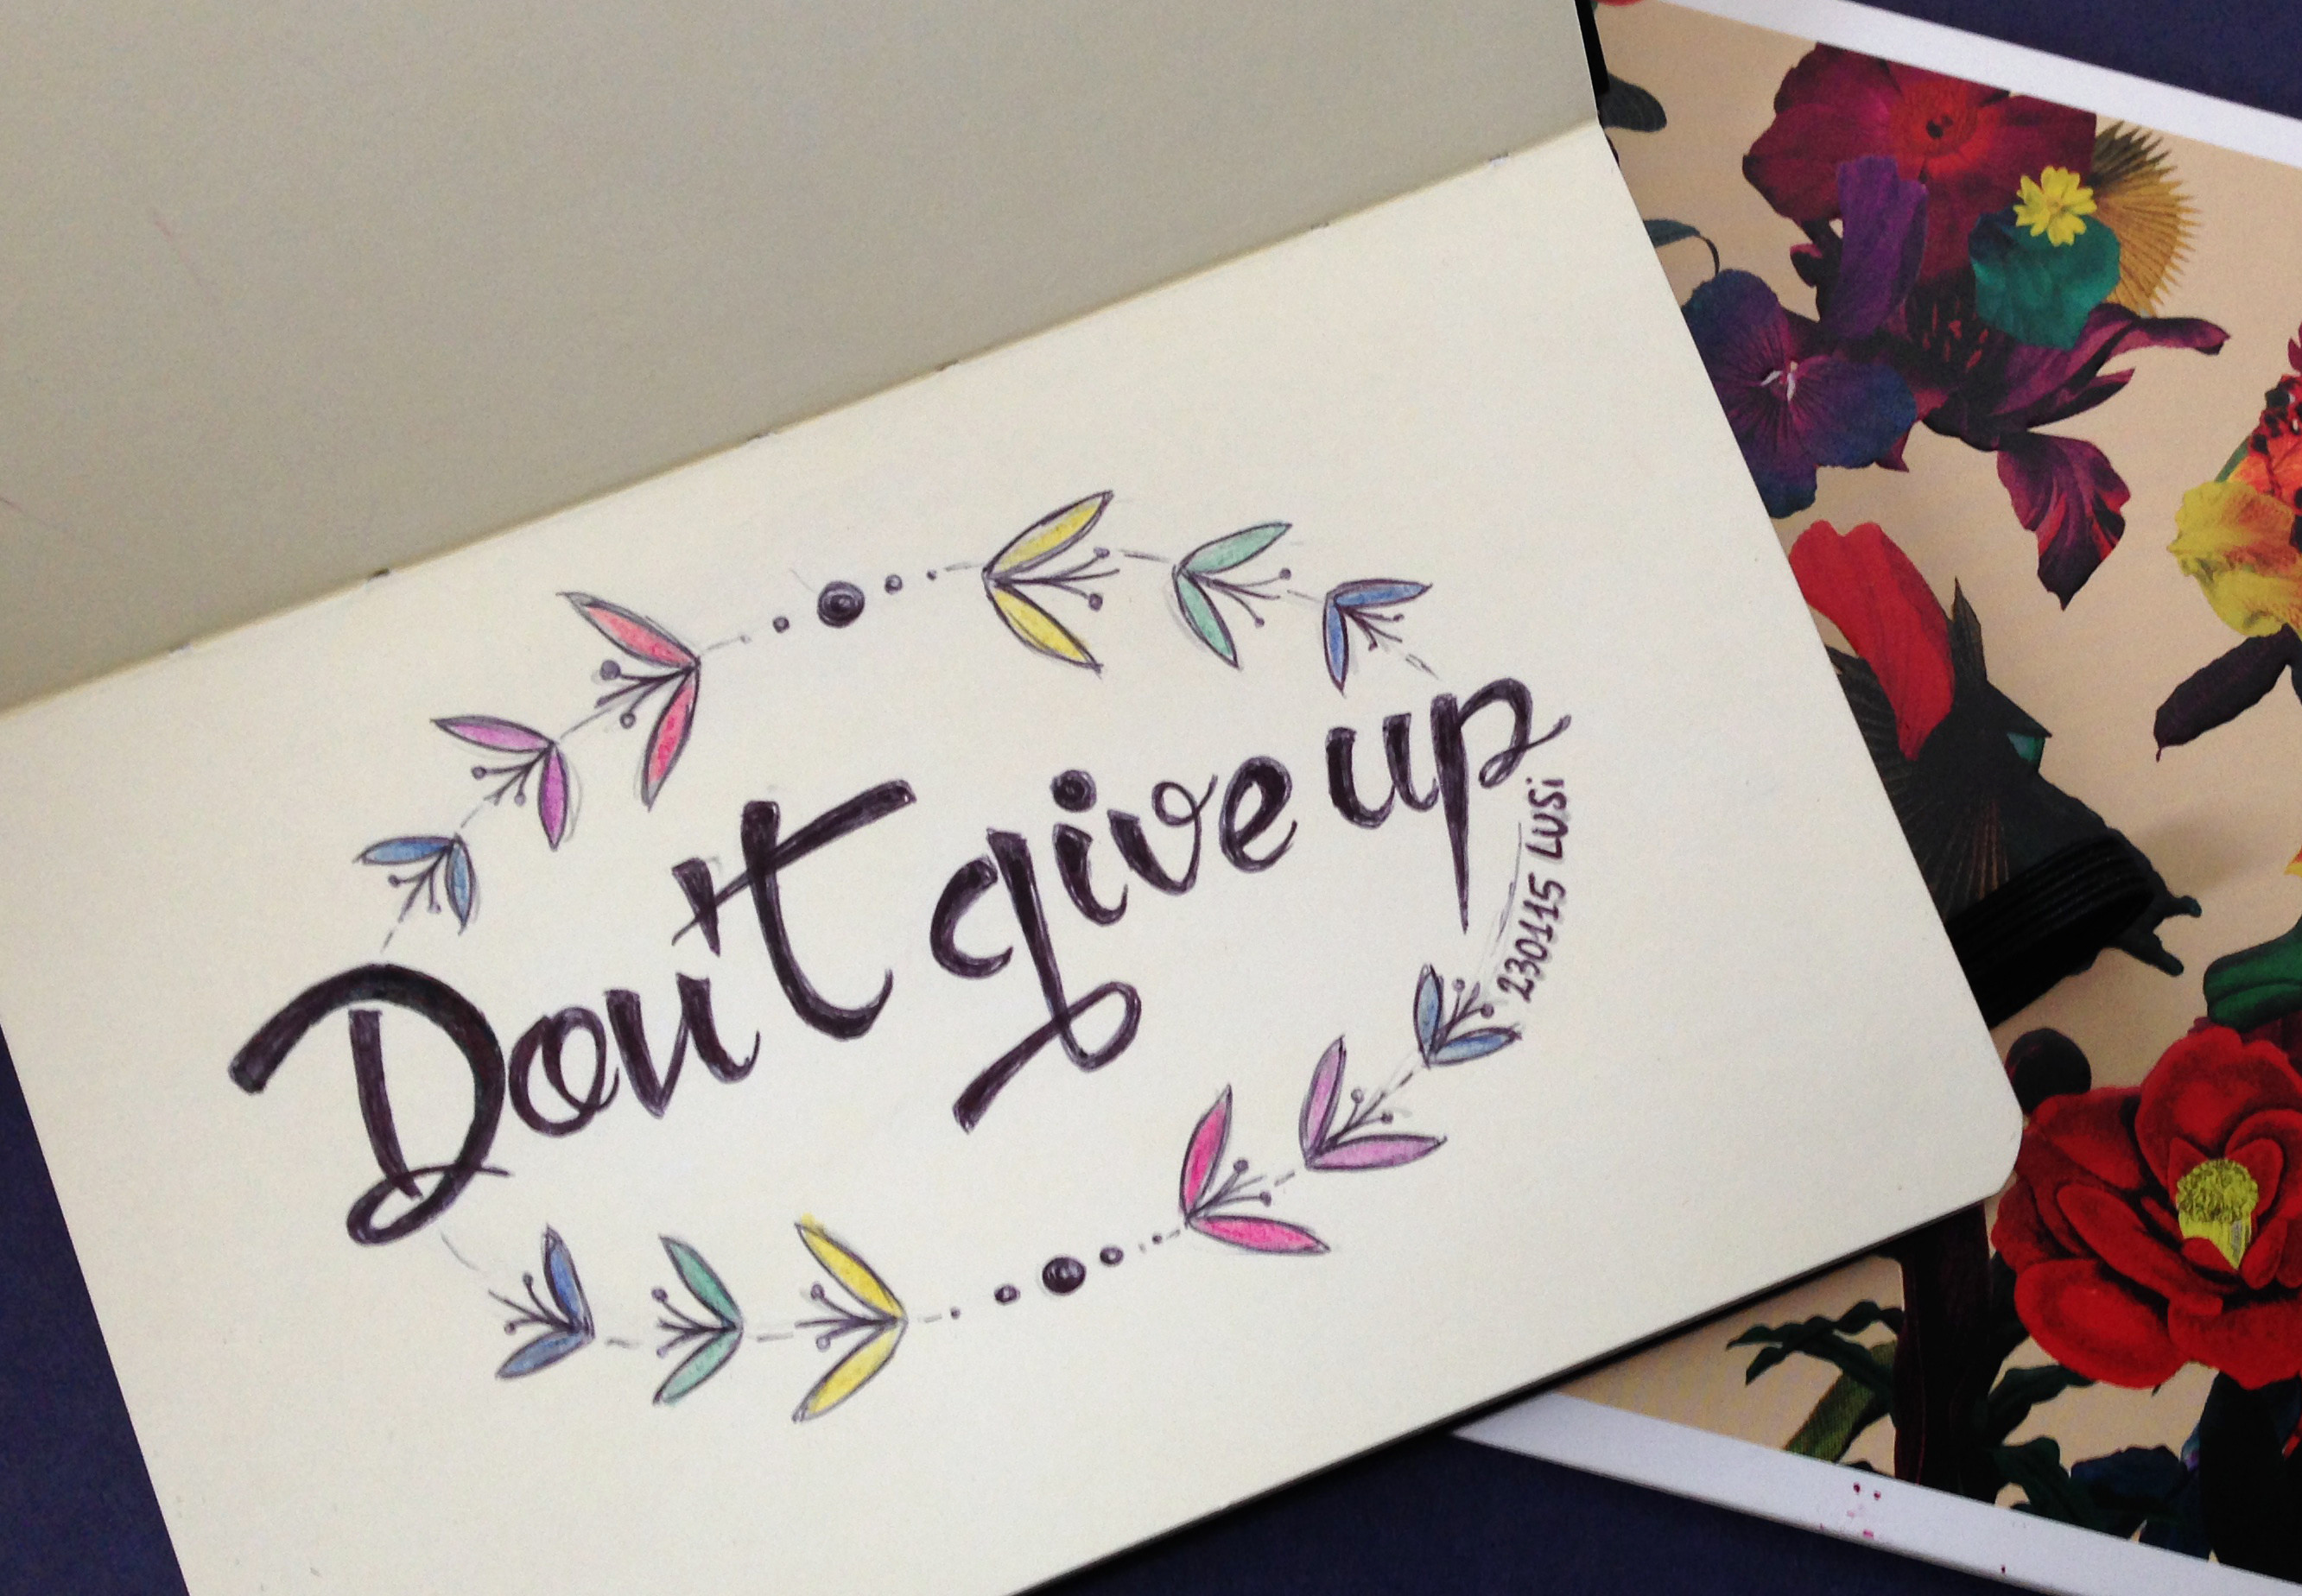 Don’t Give Up